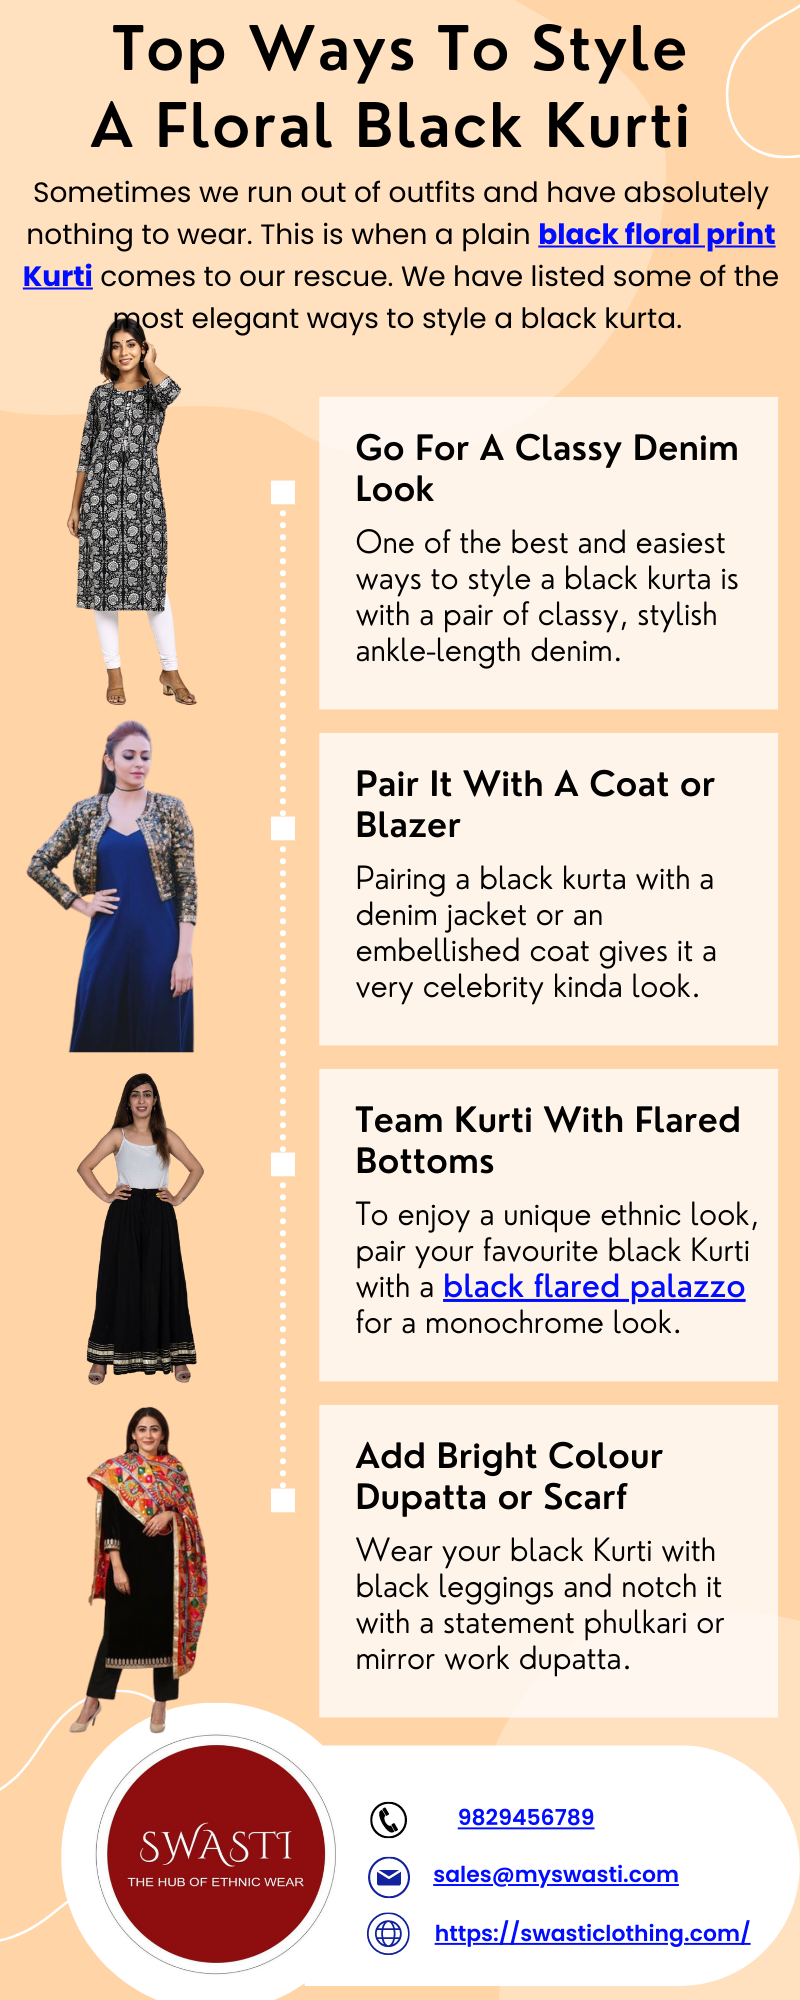 Top Ways to Style a Floral Black Kurti